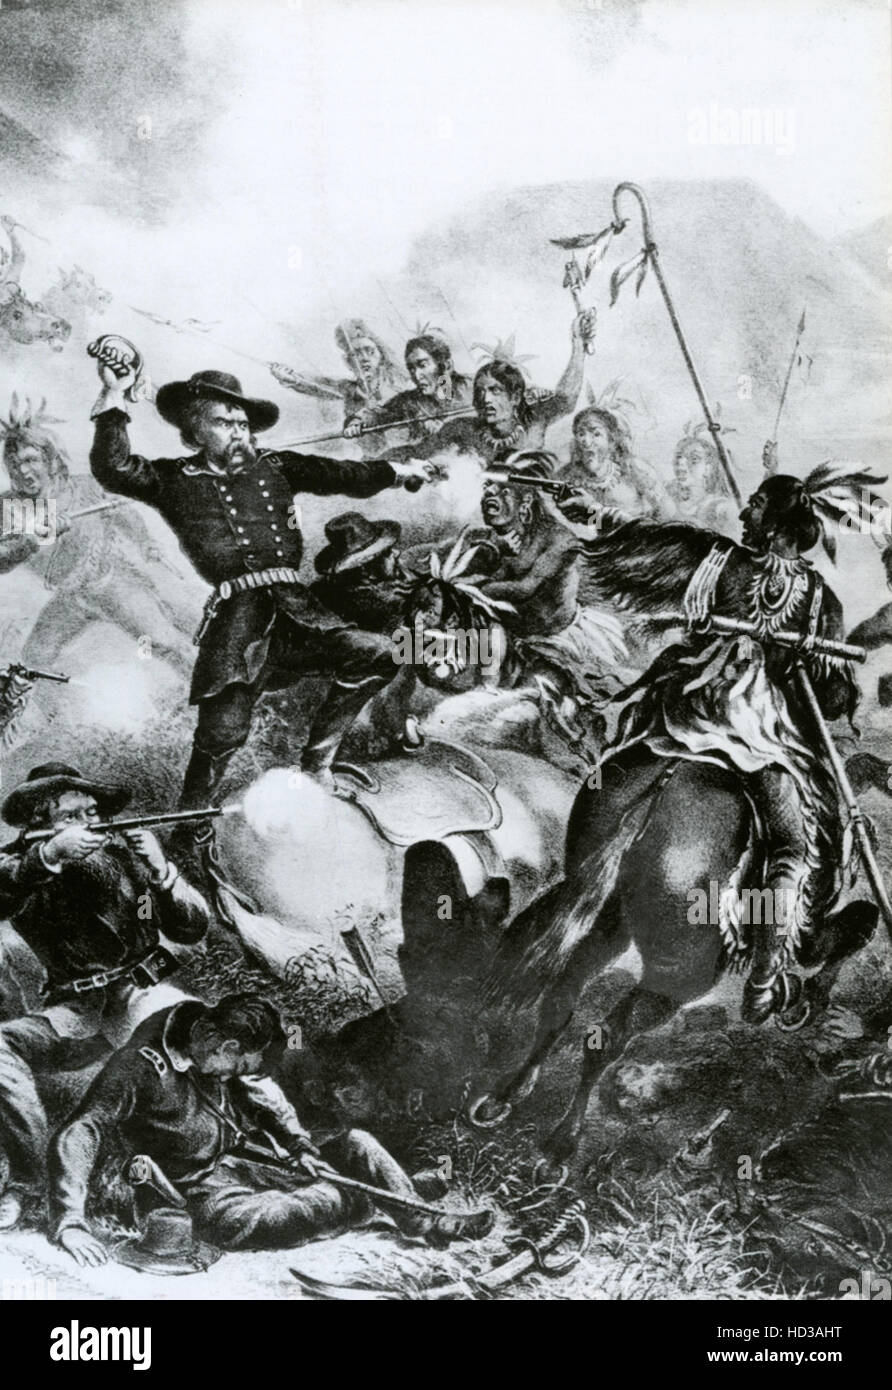 GEORGE ARMSTRONG CUSTER (1839-1876)  A 19th century depiction of the Battle of Little Bighorn, June 25-26 !878 Stock Photo